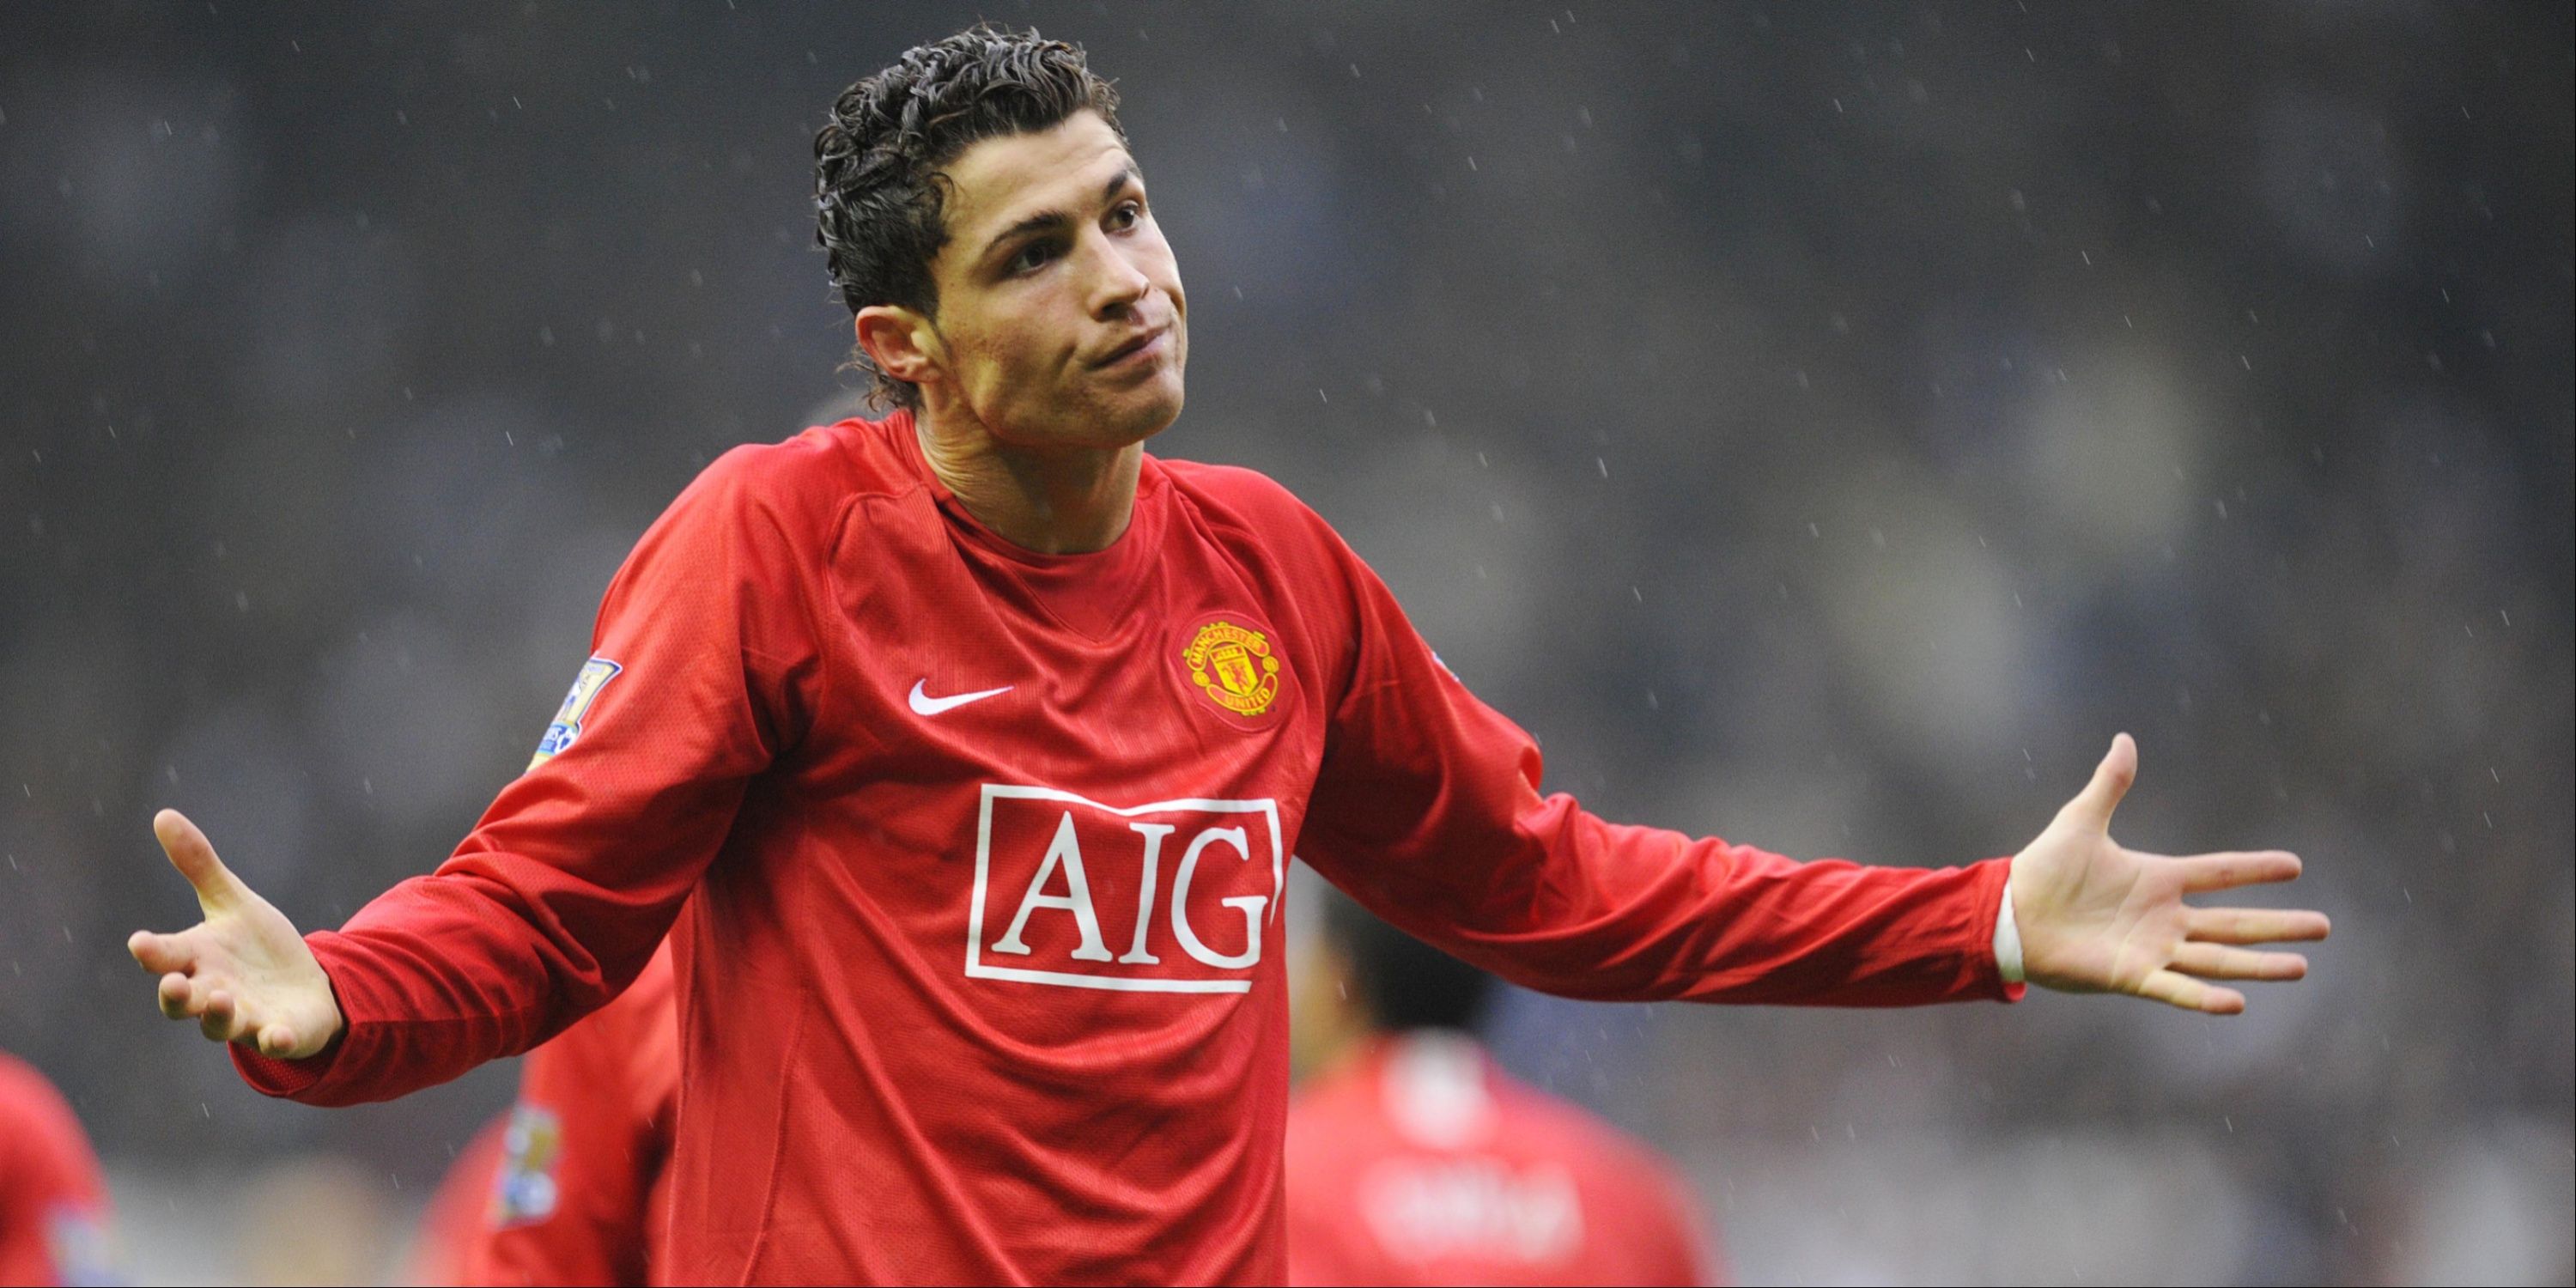 Cristiano Ronaldo shrugs after scoring a goal for Manchester United.